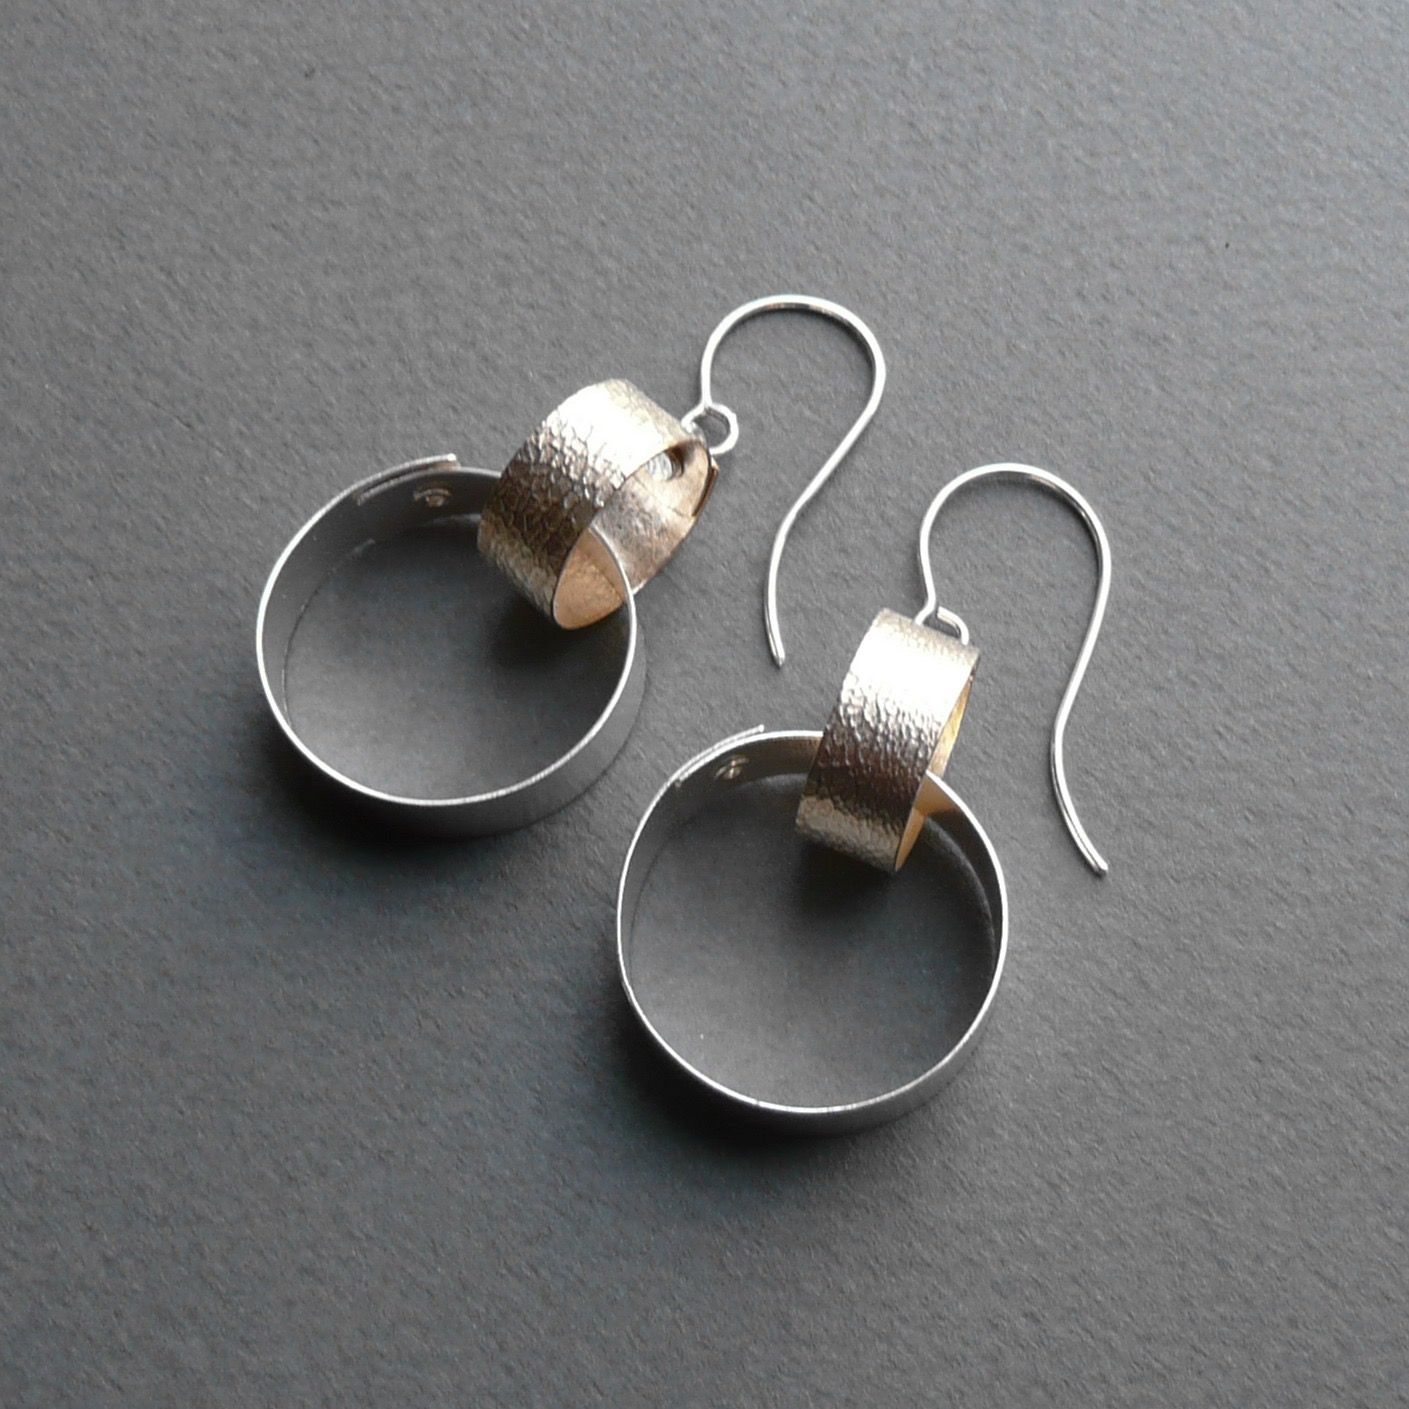 Contemporary silver jewellery, handcrafted in Scotland